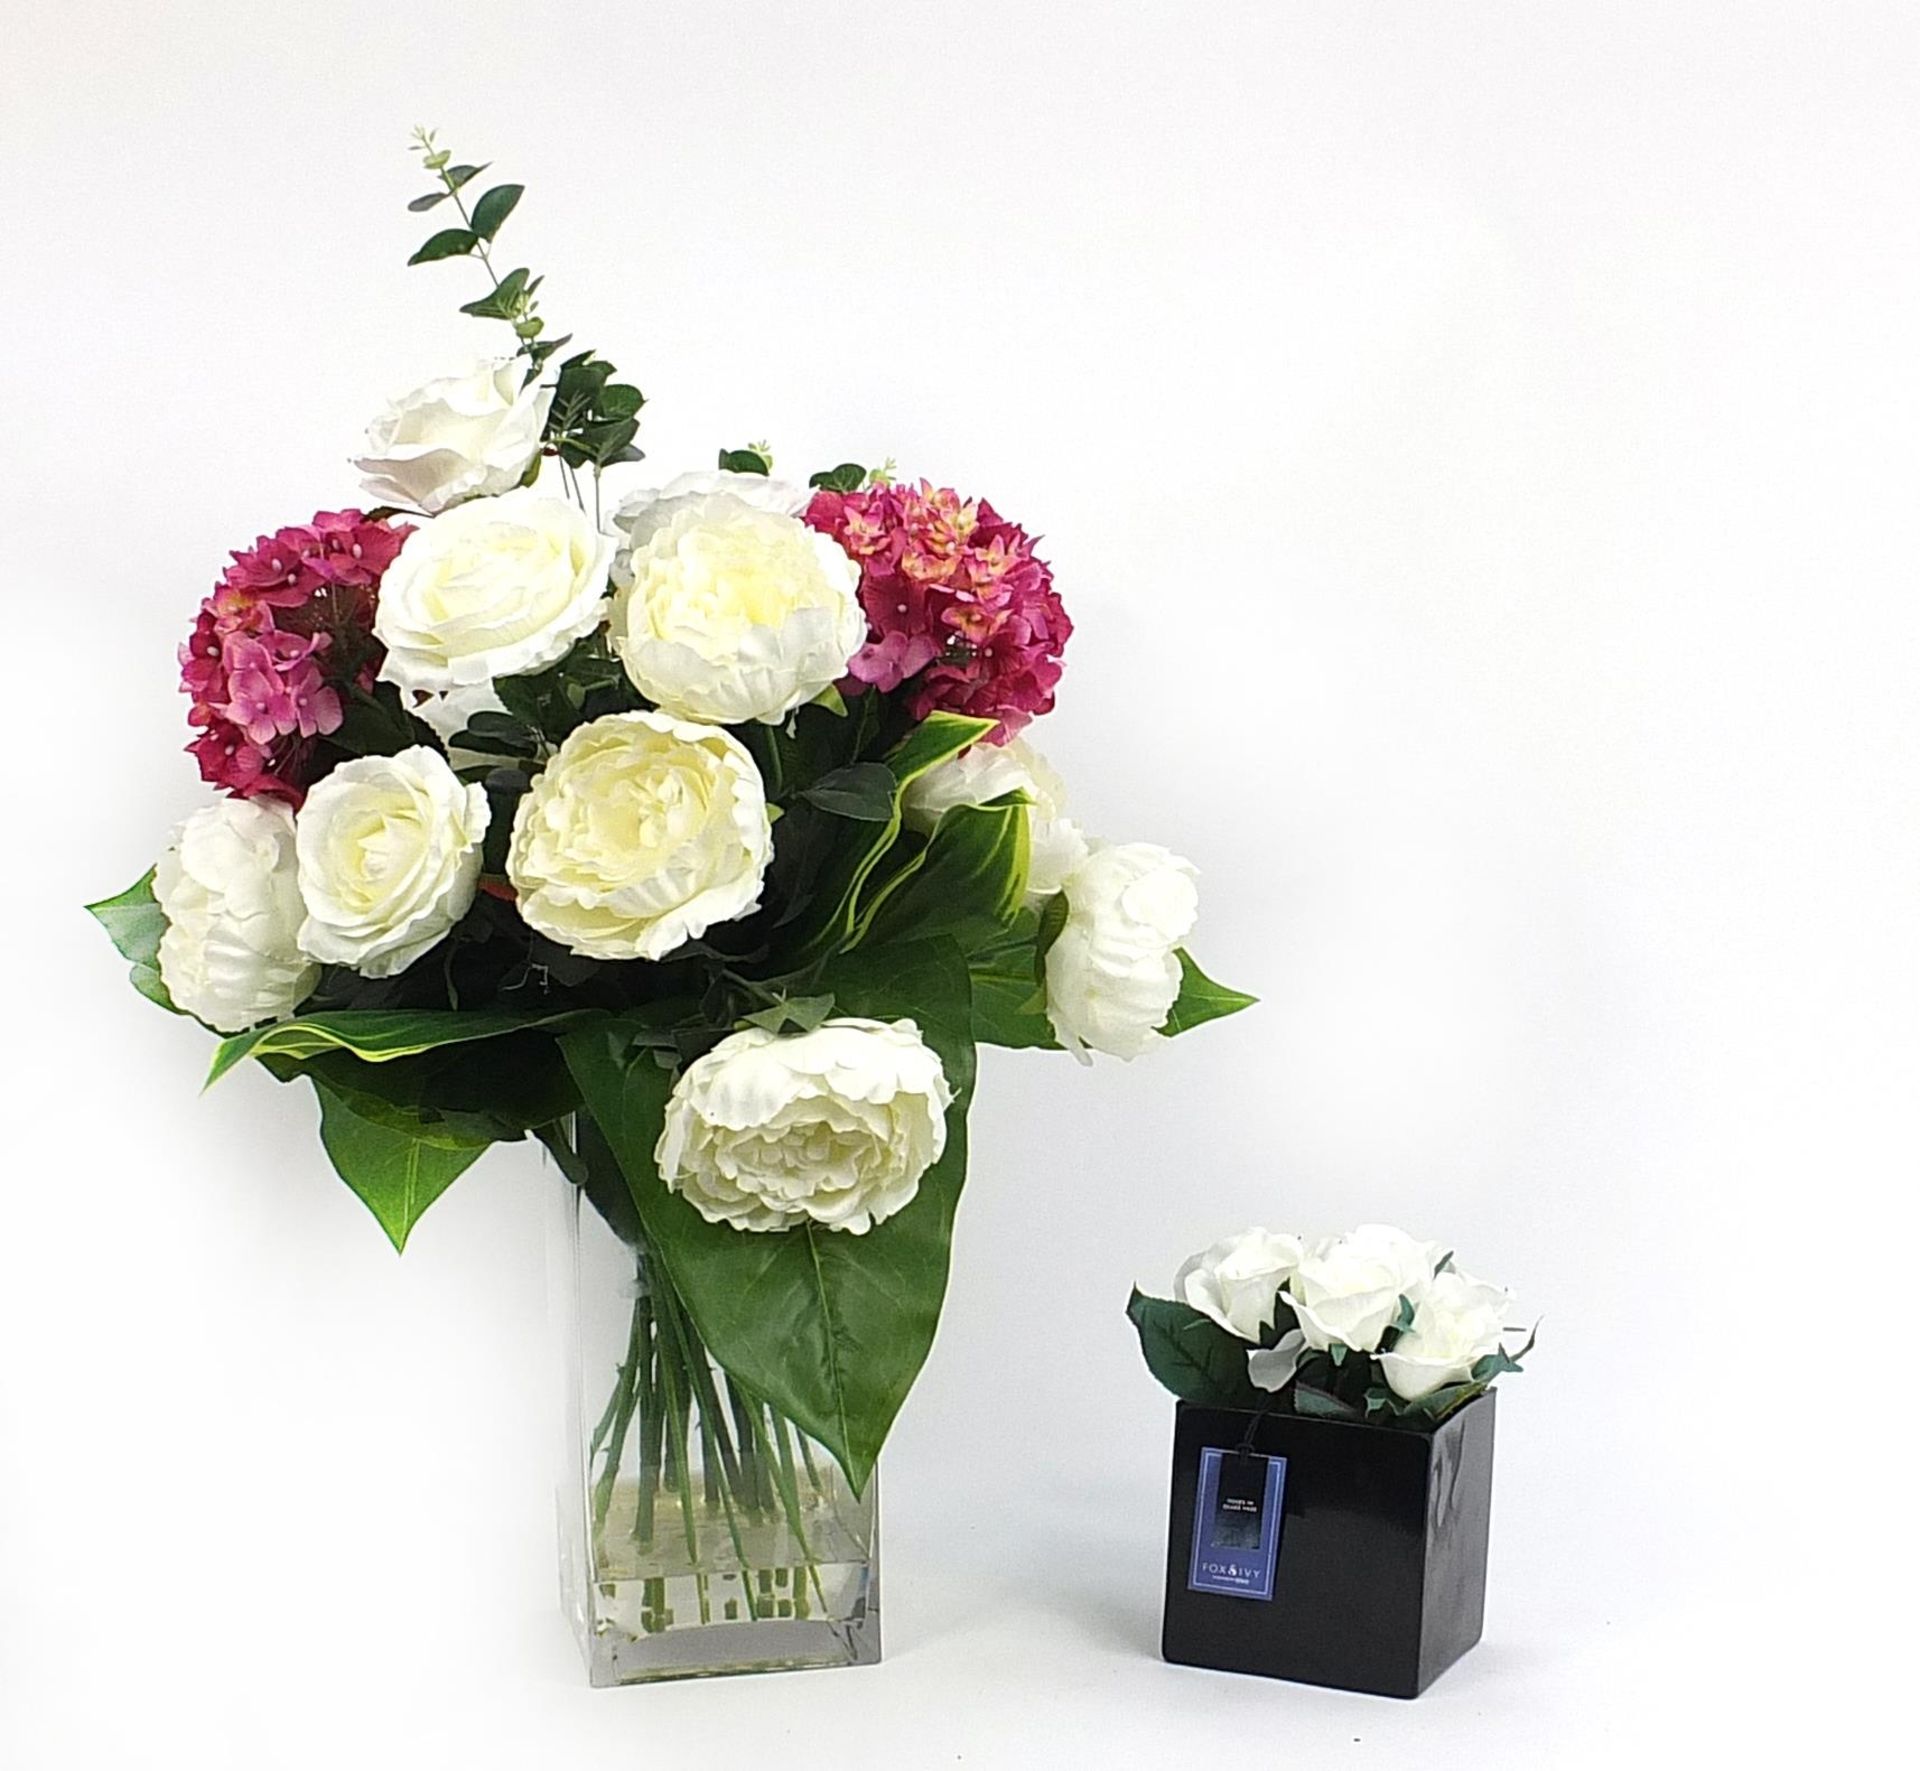 Glass vase artificial flower display of peonies and hydrangeas together with Fox & Ivy roses in a